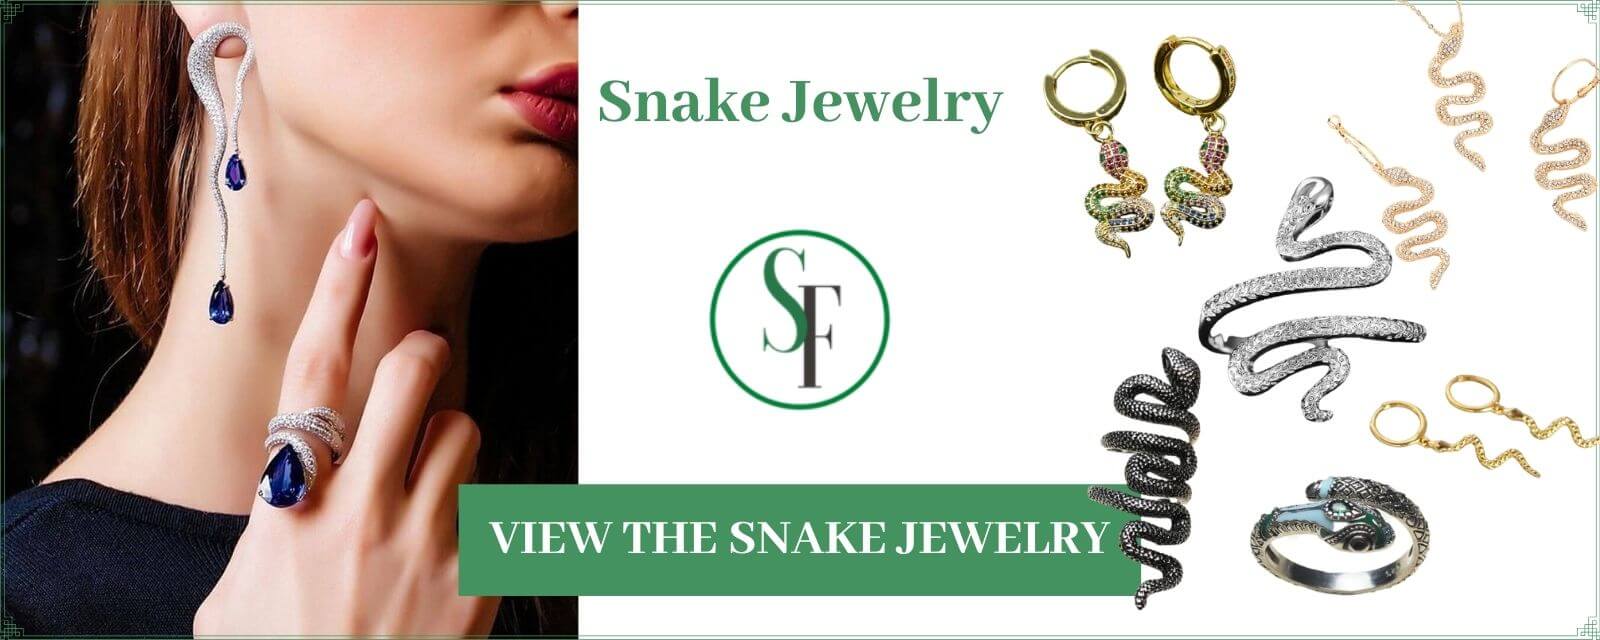 What is Snake Jewelry